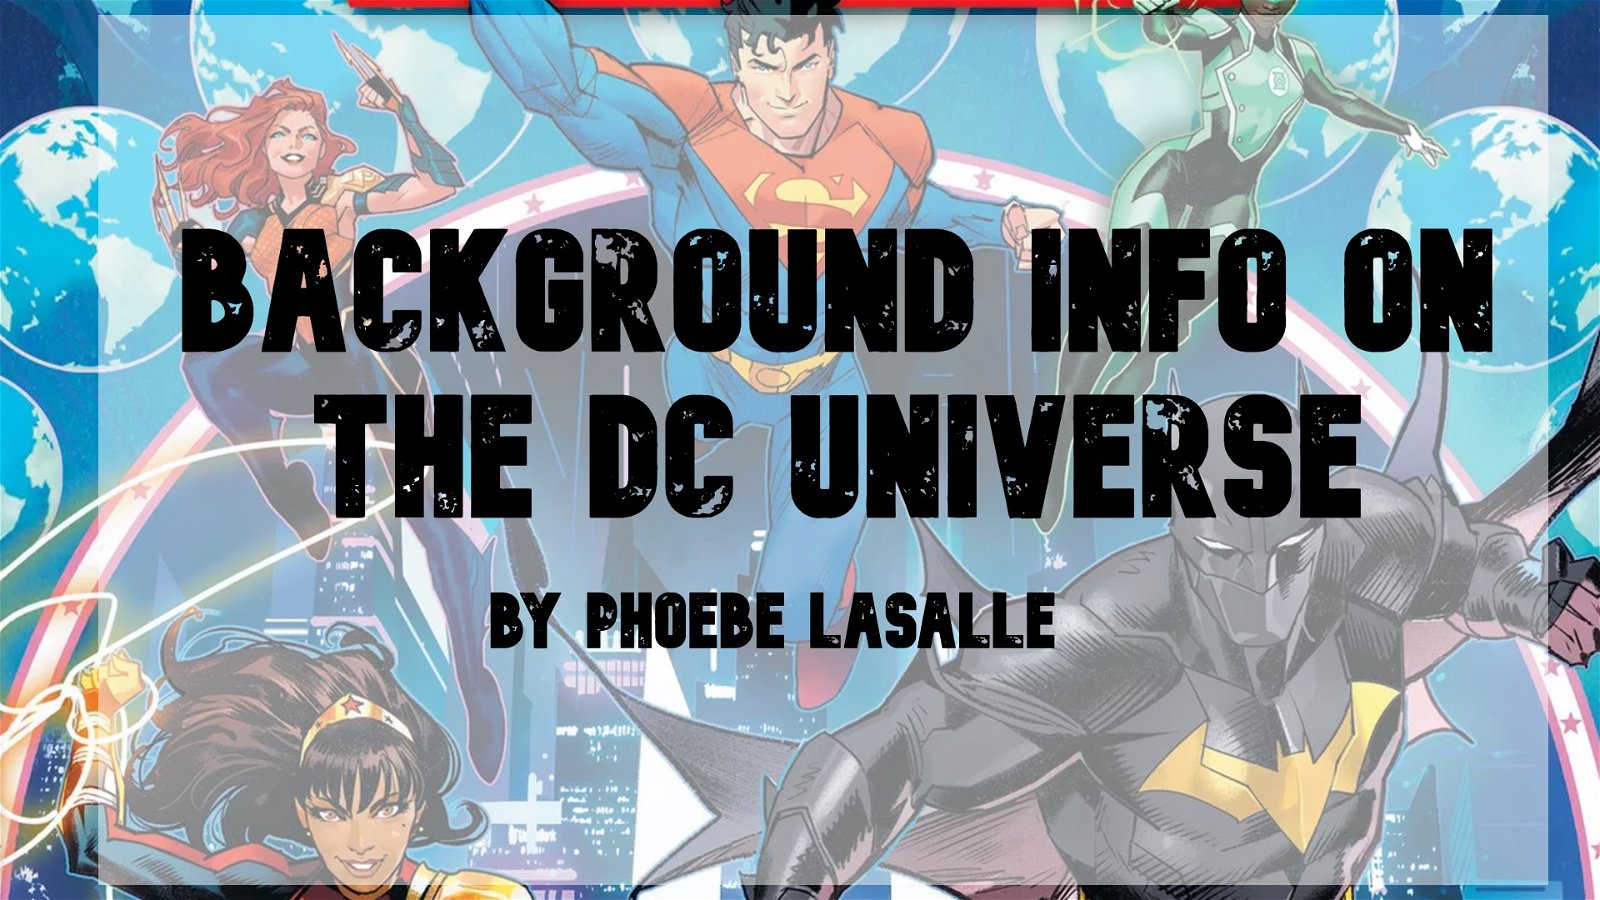 Background Info on DC Universe #3